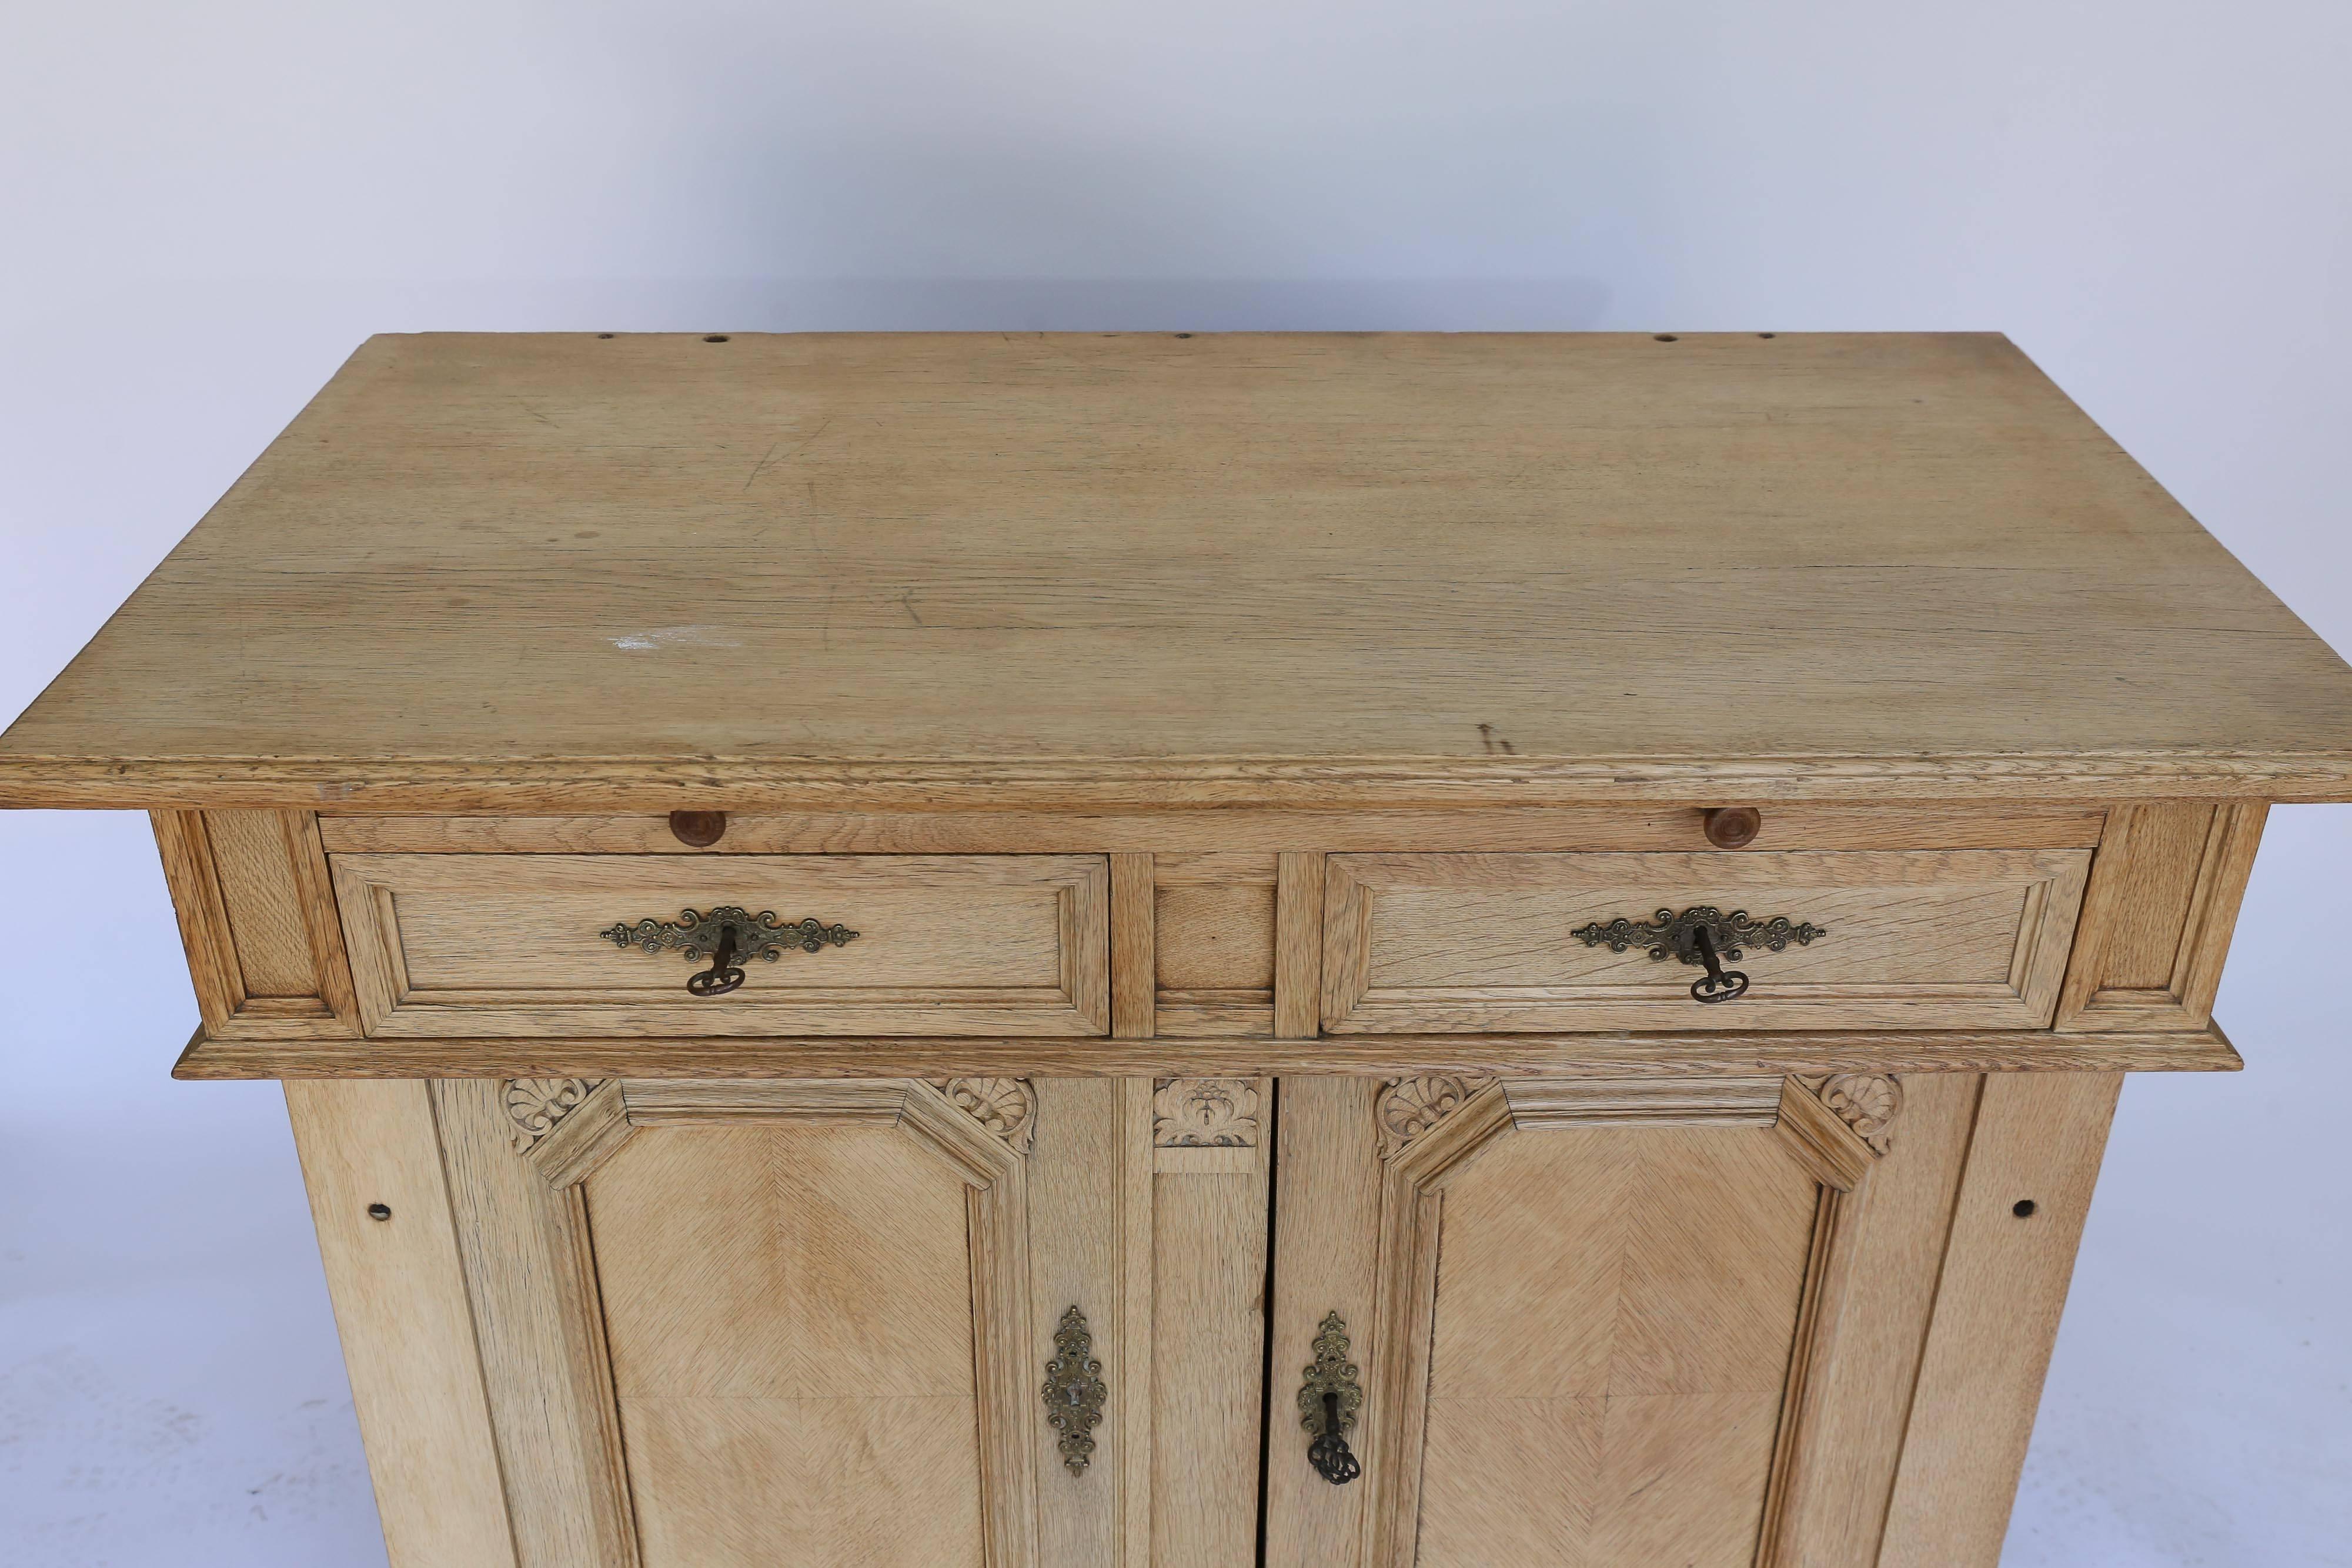 A striking kitchen cabinet from France made of pine that has been stripped. With applied wood trim and detailing and a diamond veneer pattern framed out on the doors, this piece has wonderful eye appeal. Two drawers and two doors open for lots of